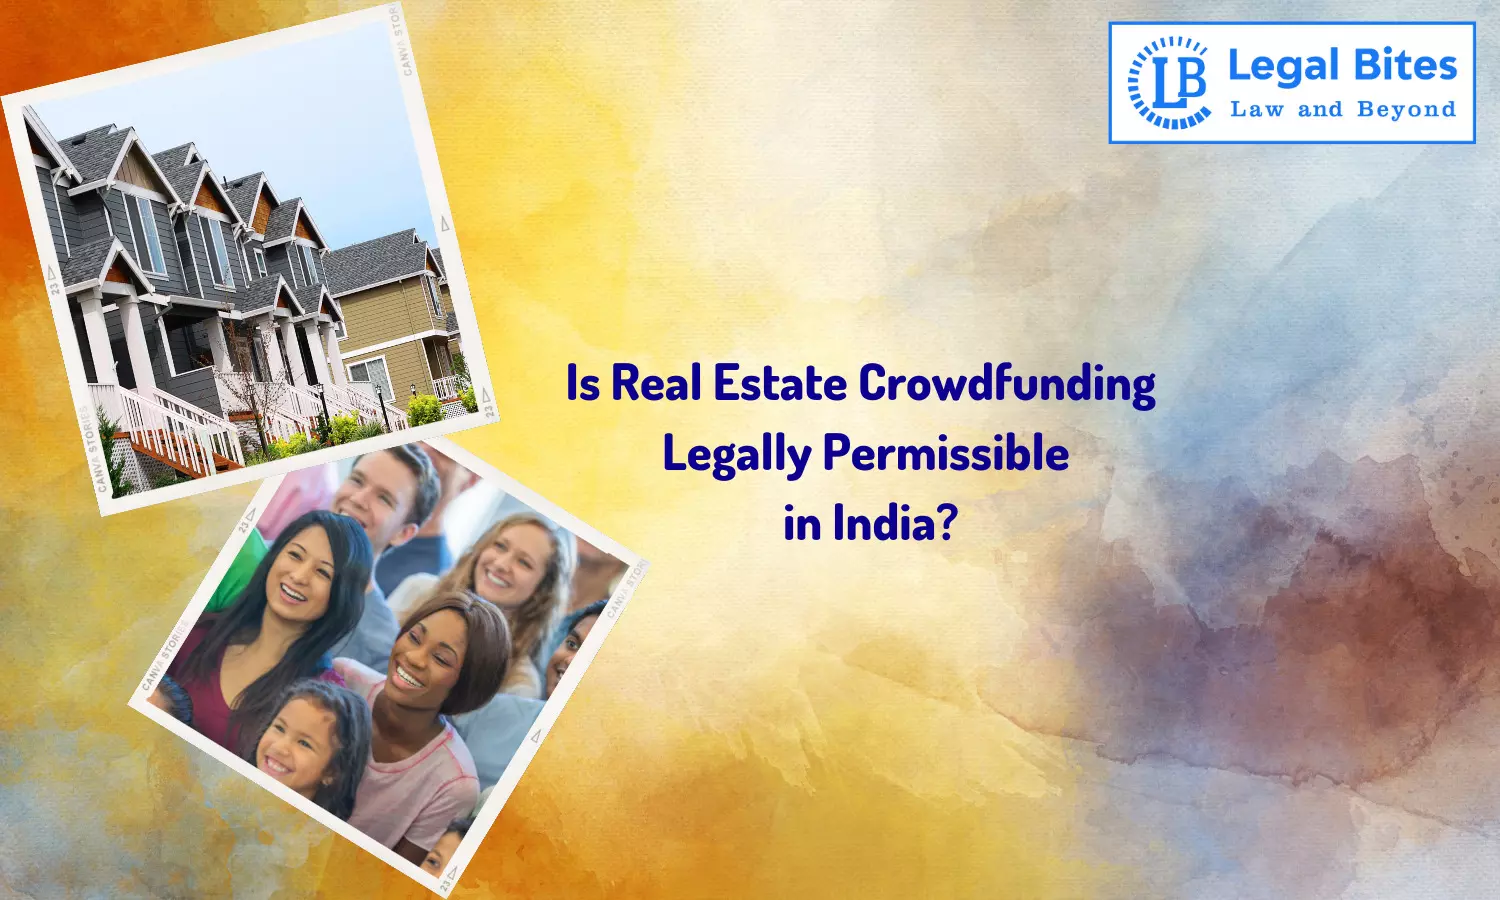 Is Real Estate Crowdfunding Legally Permissible in India?